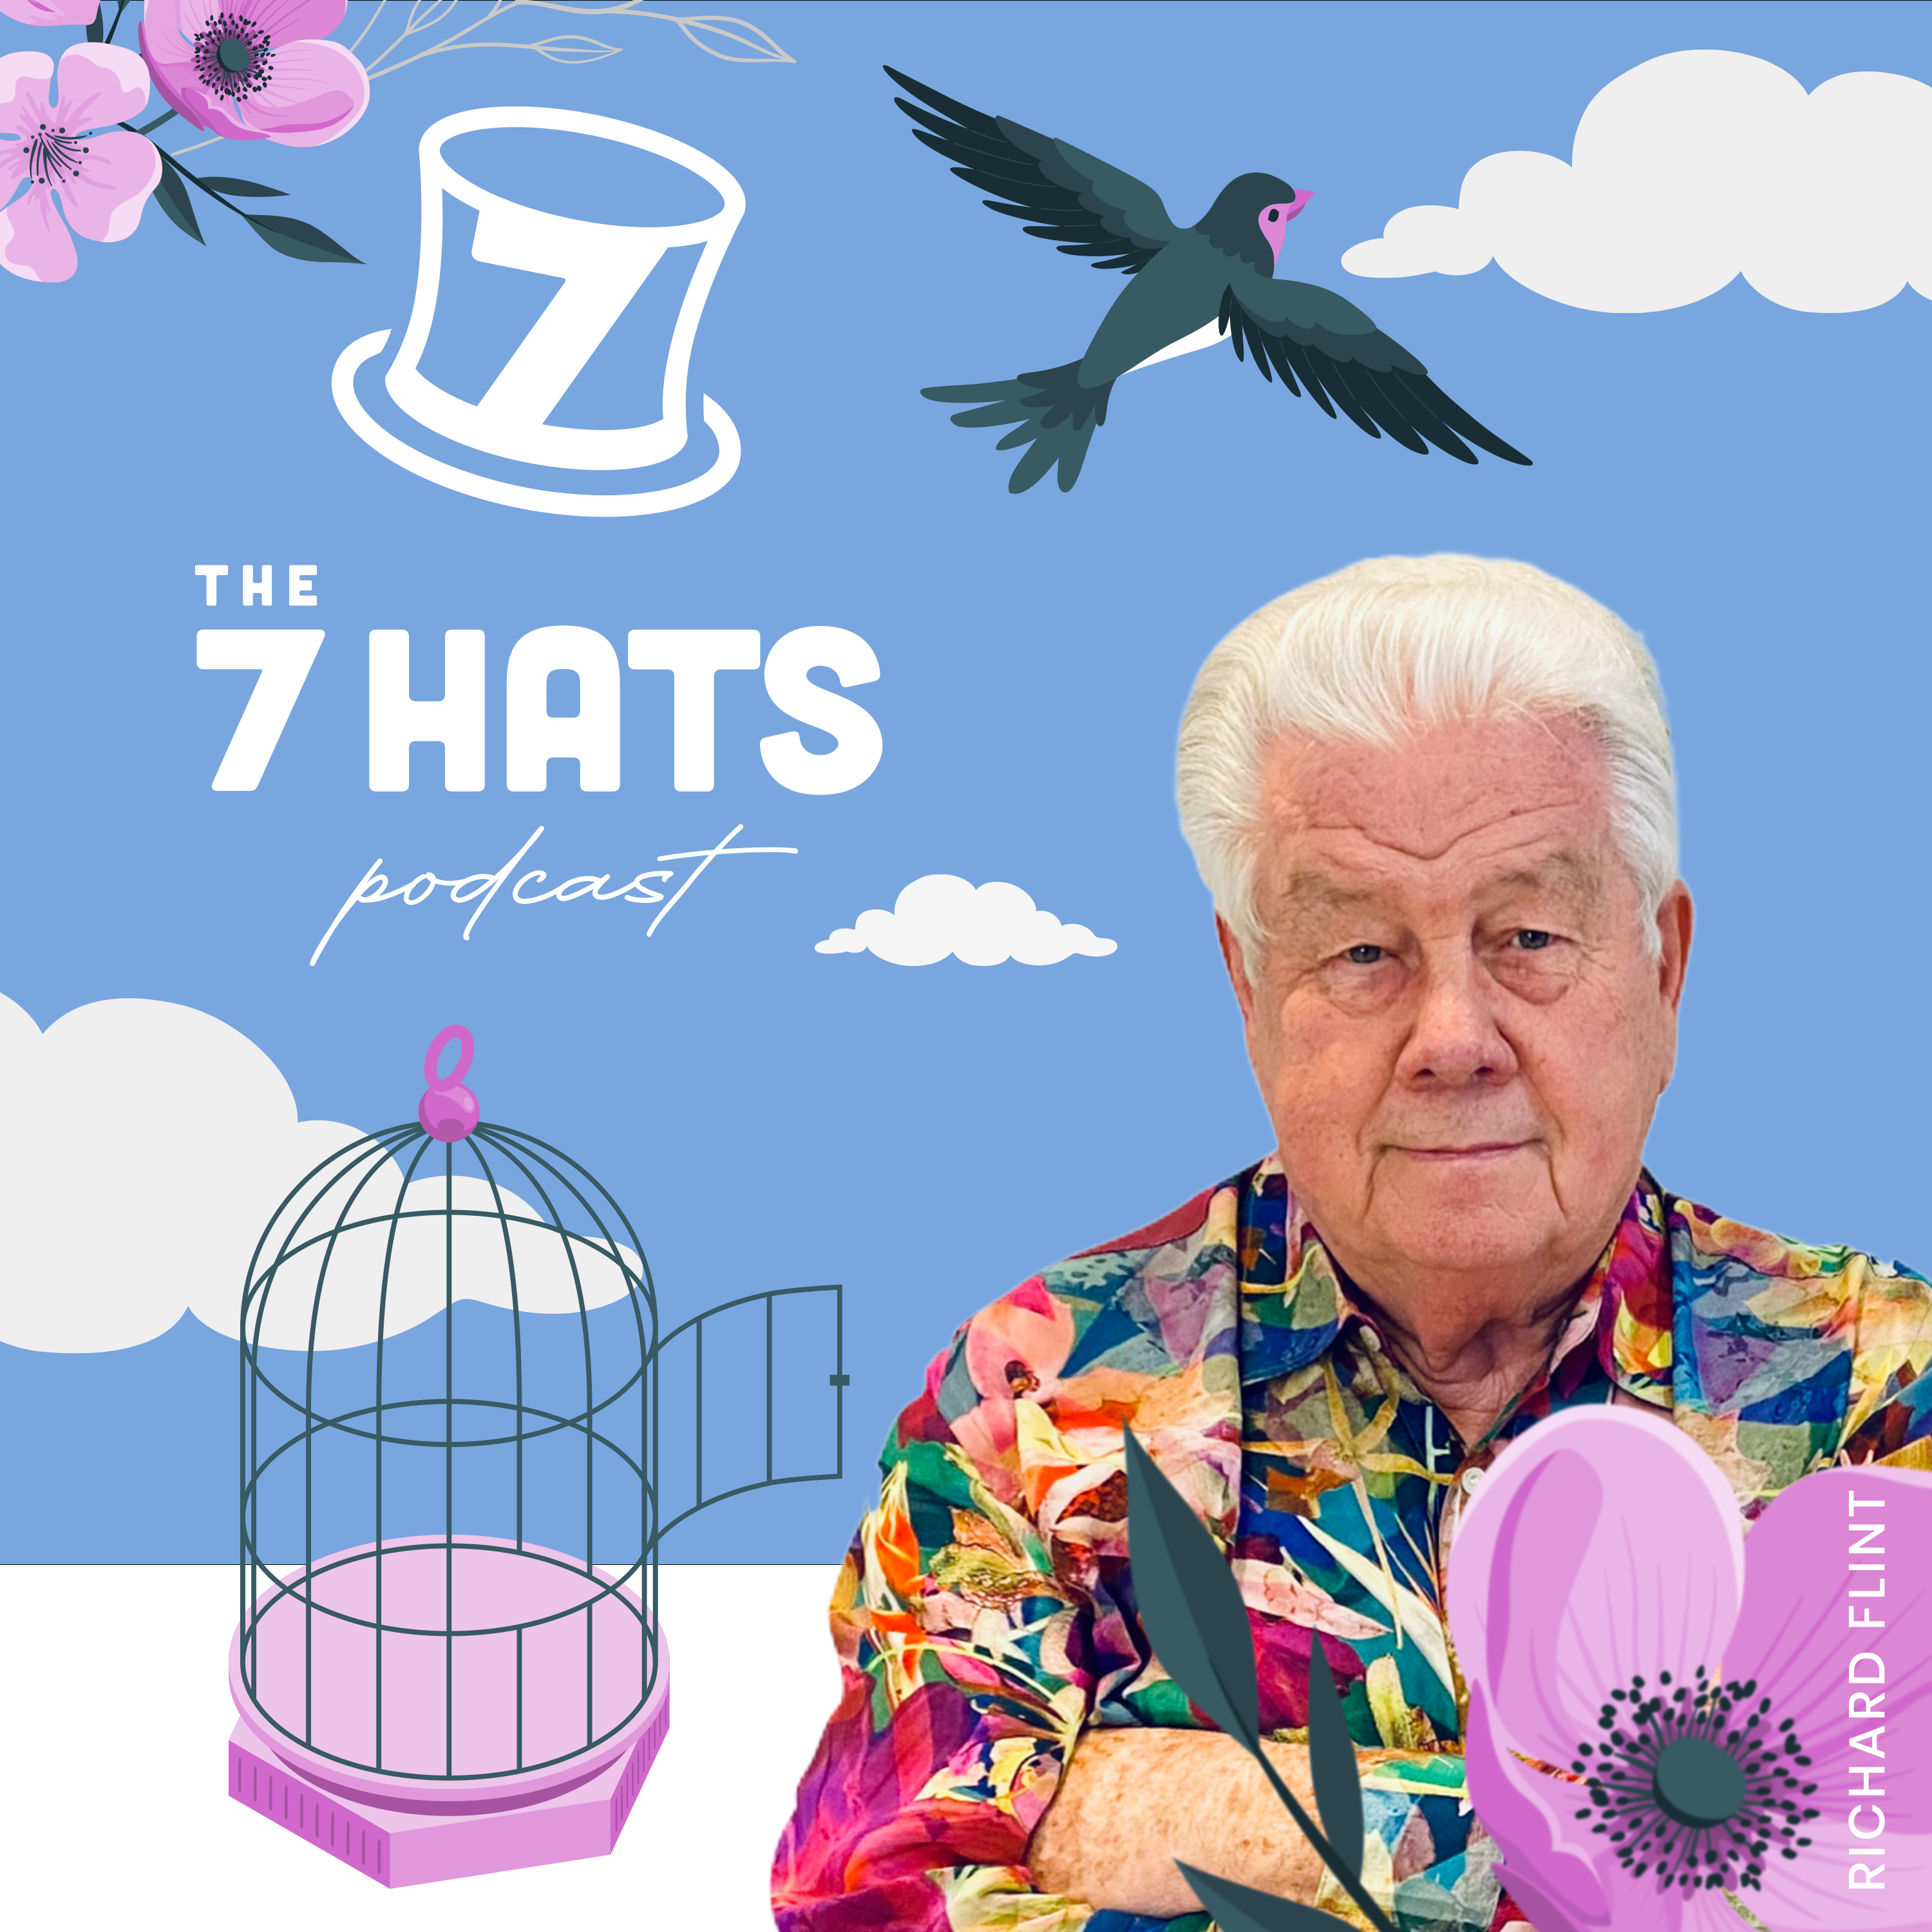 7hats podcast